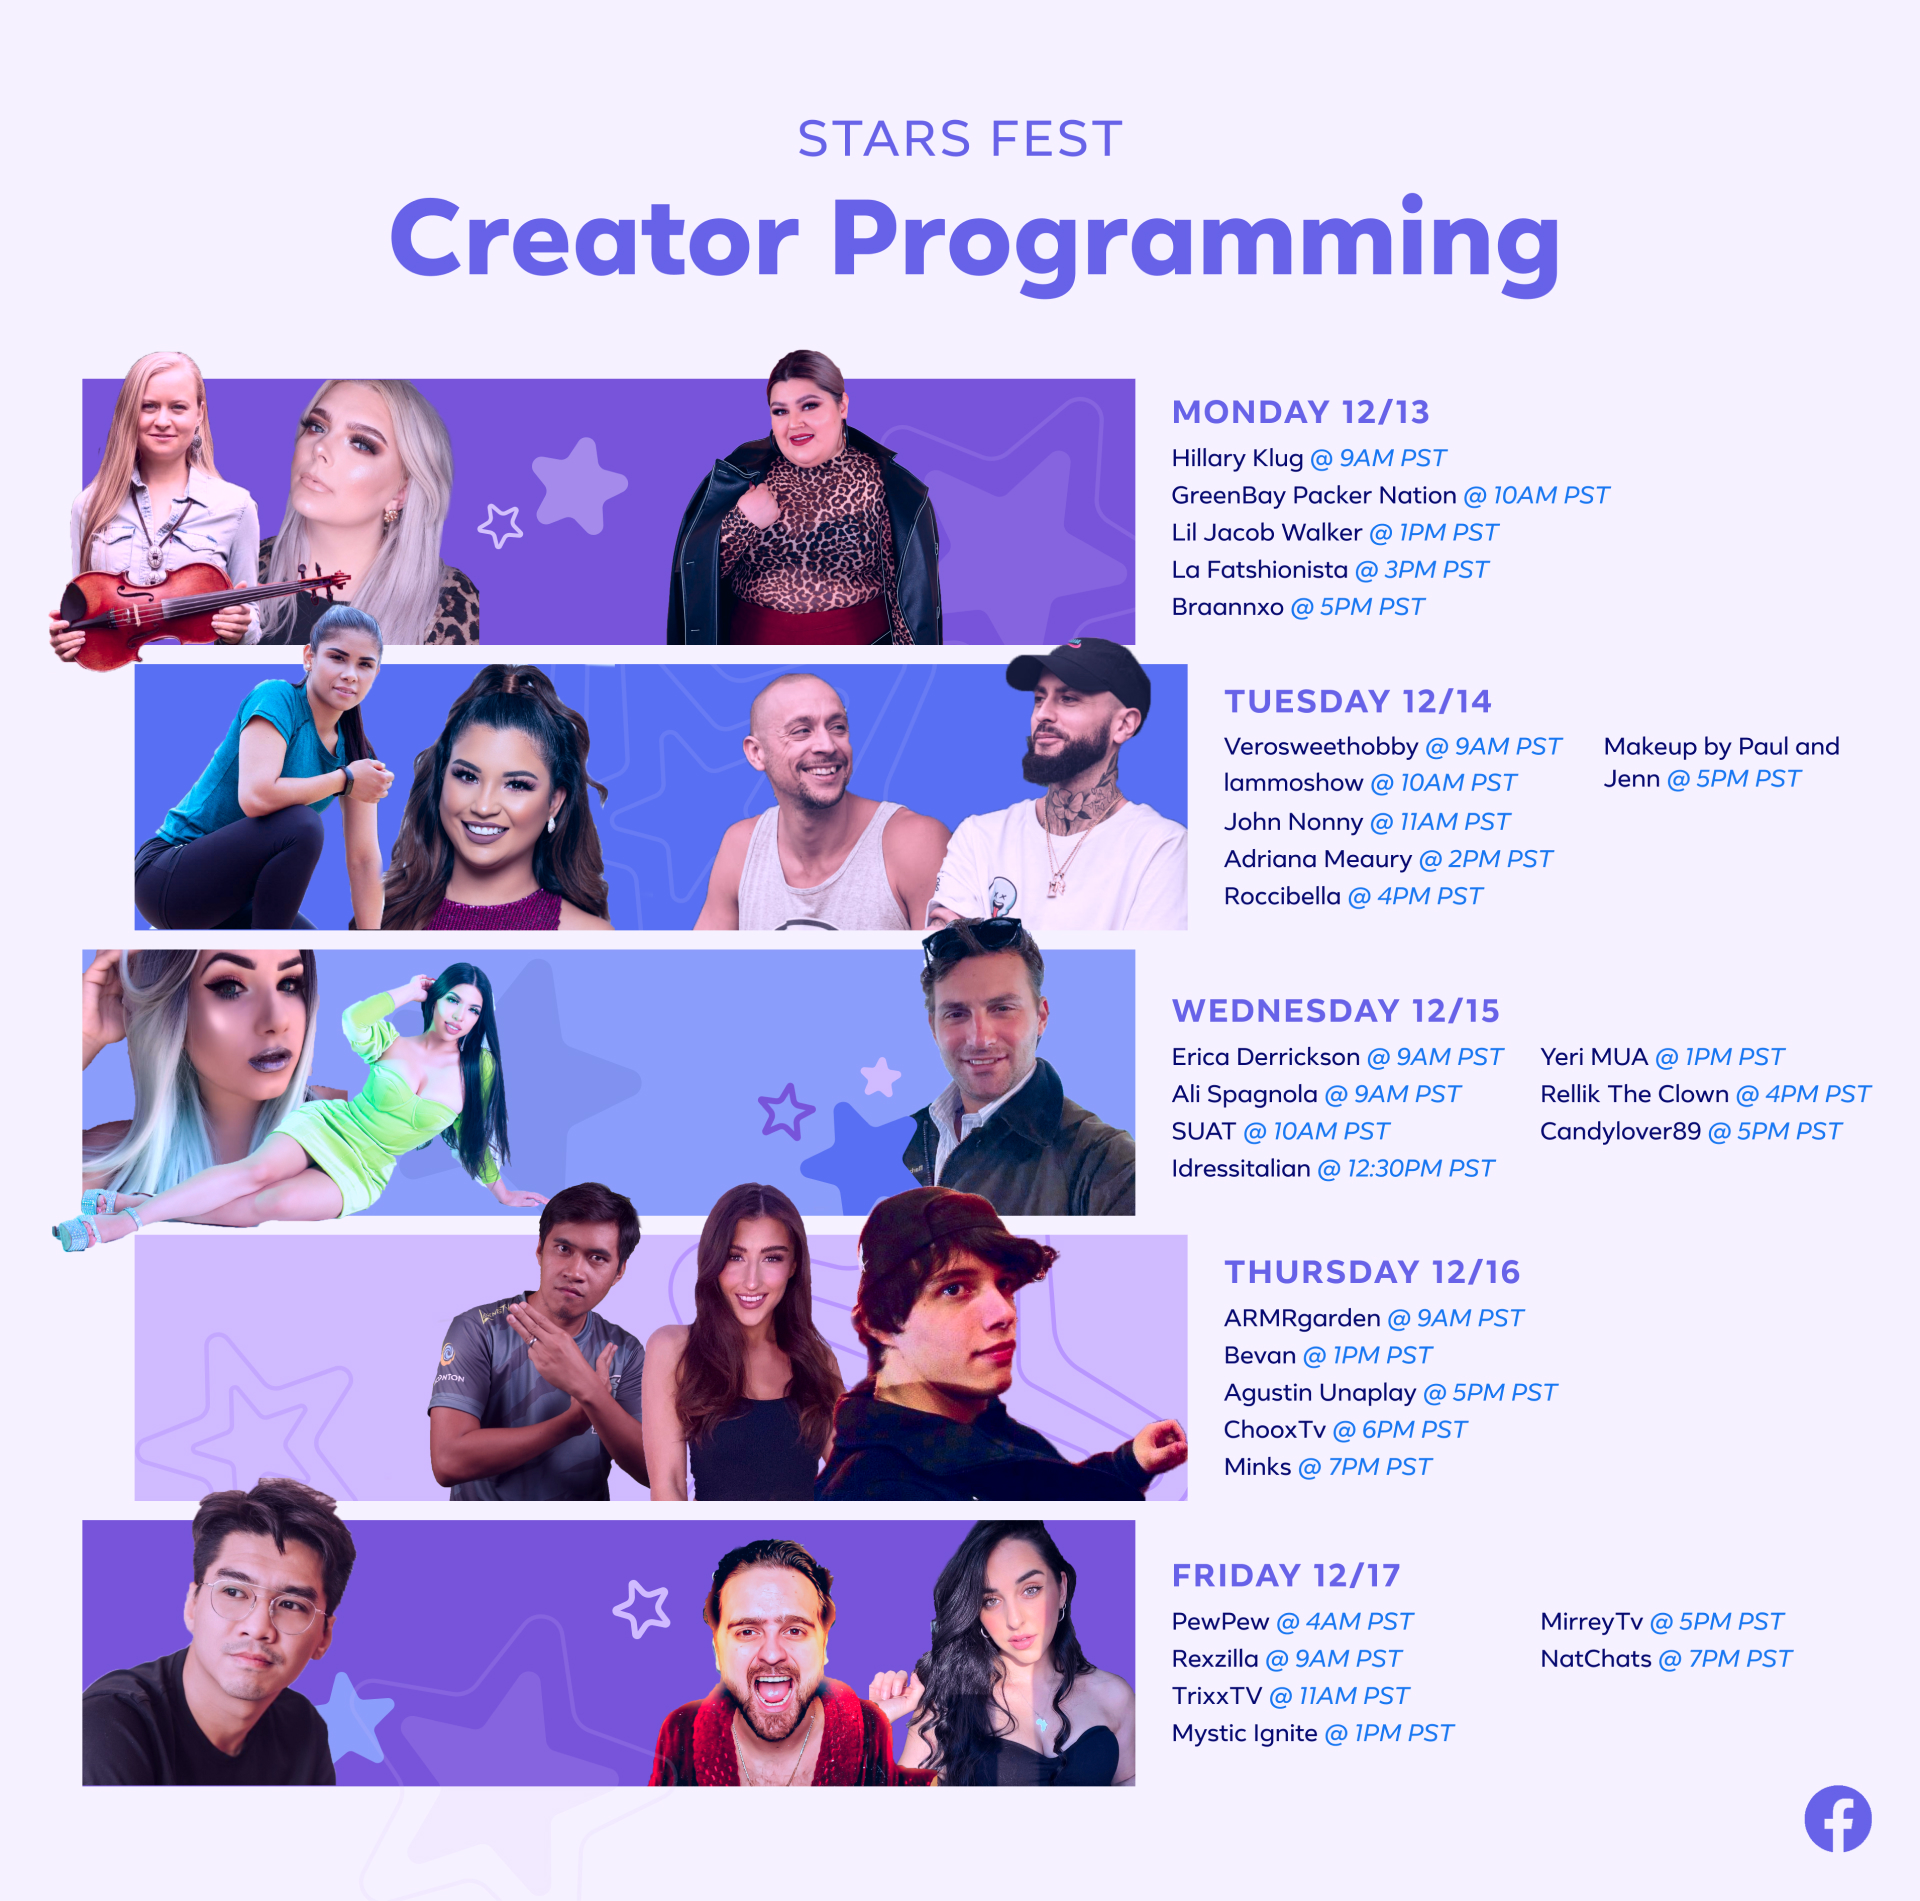 Infographic of Creator Programming schedule for Stars Fest